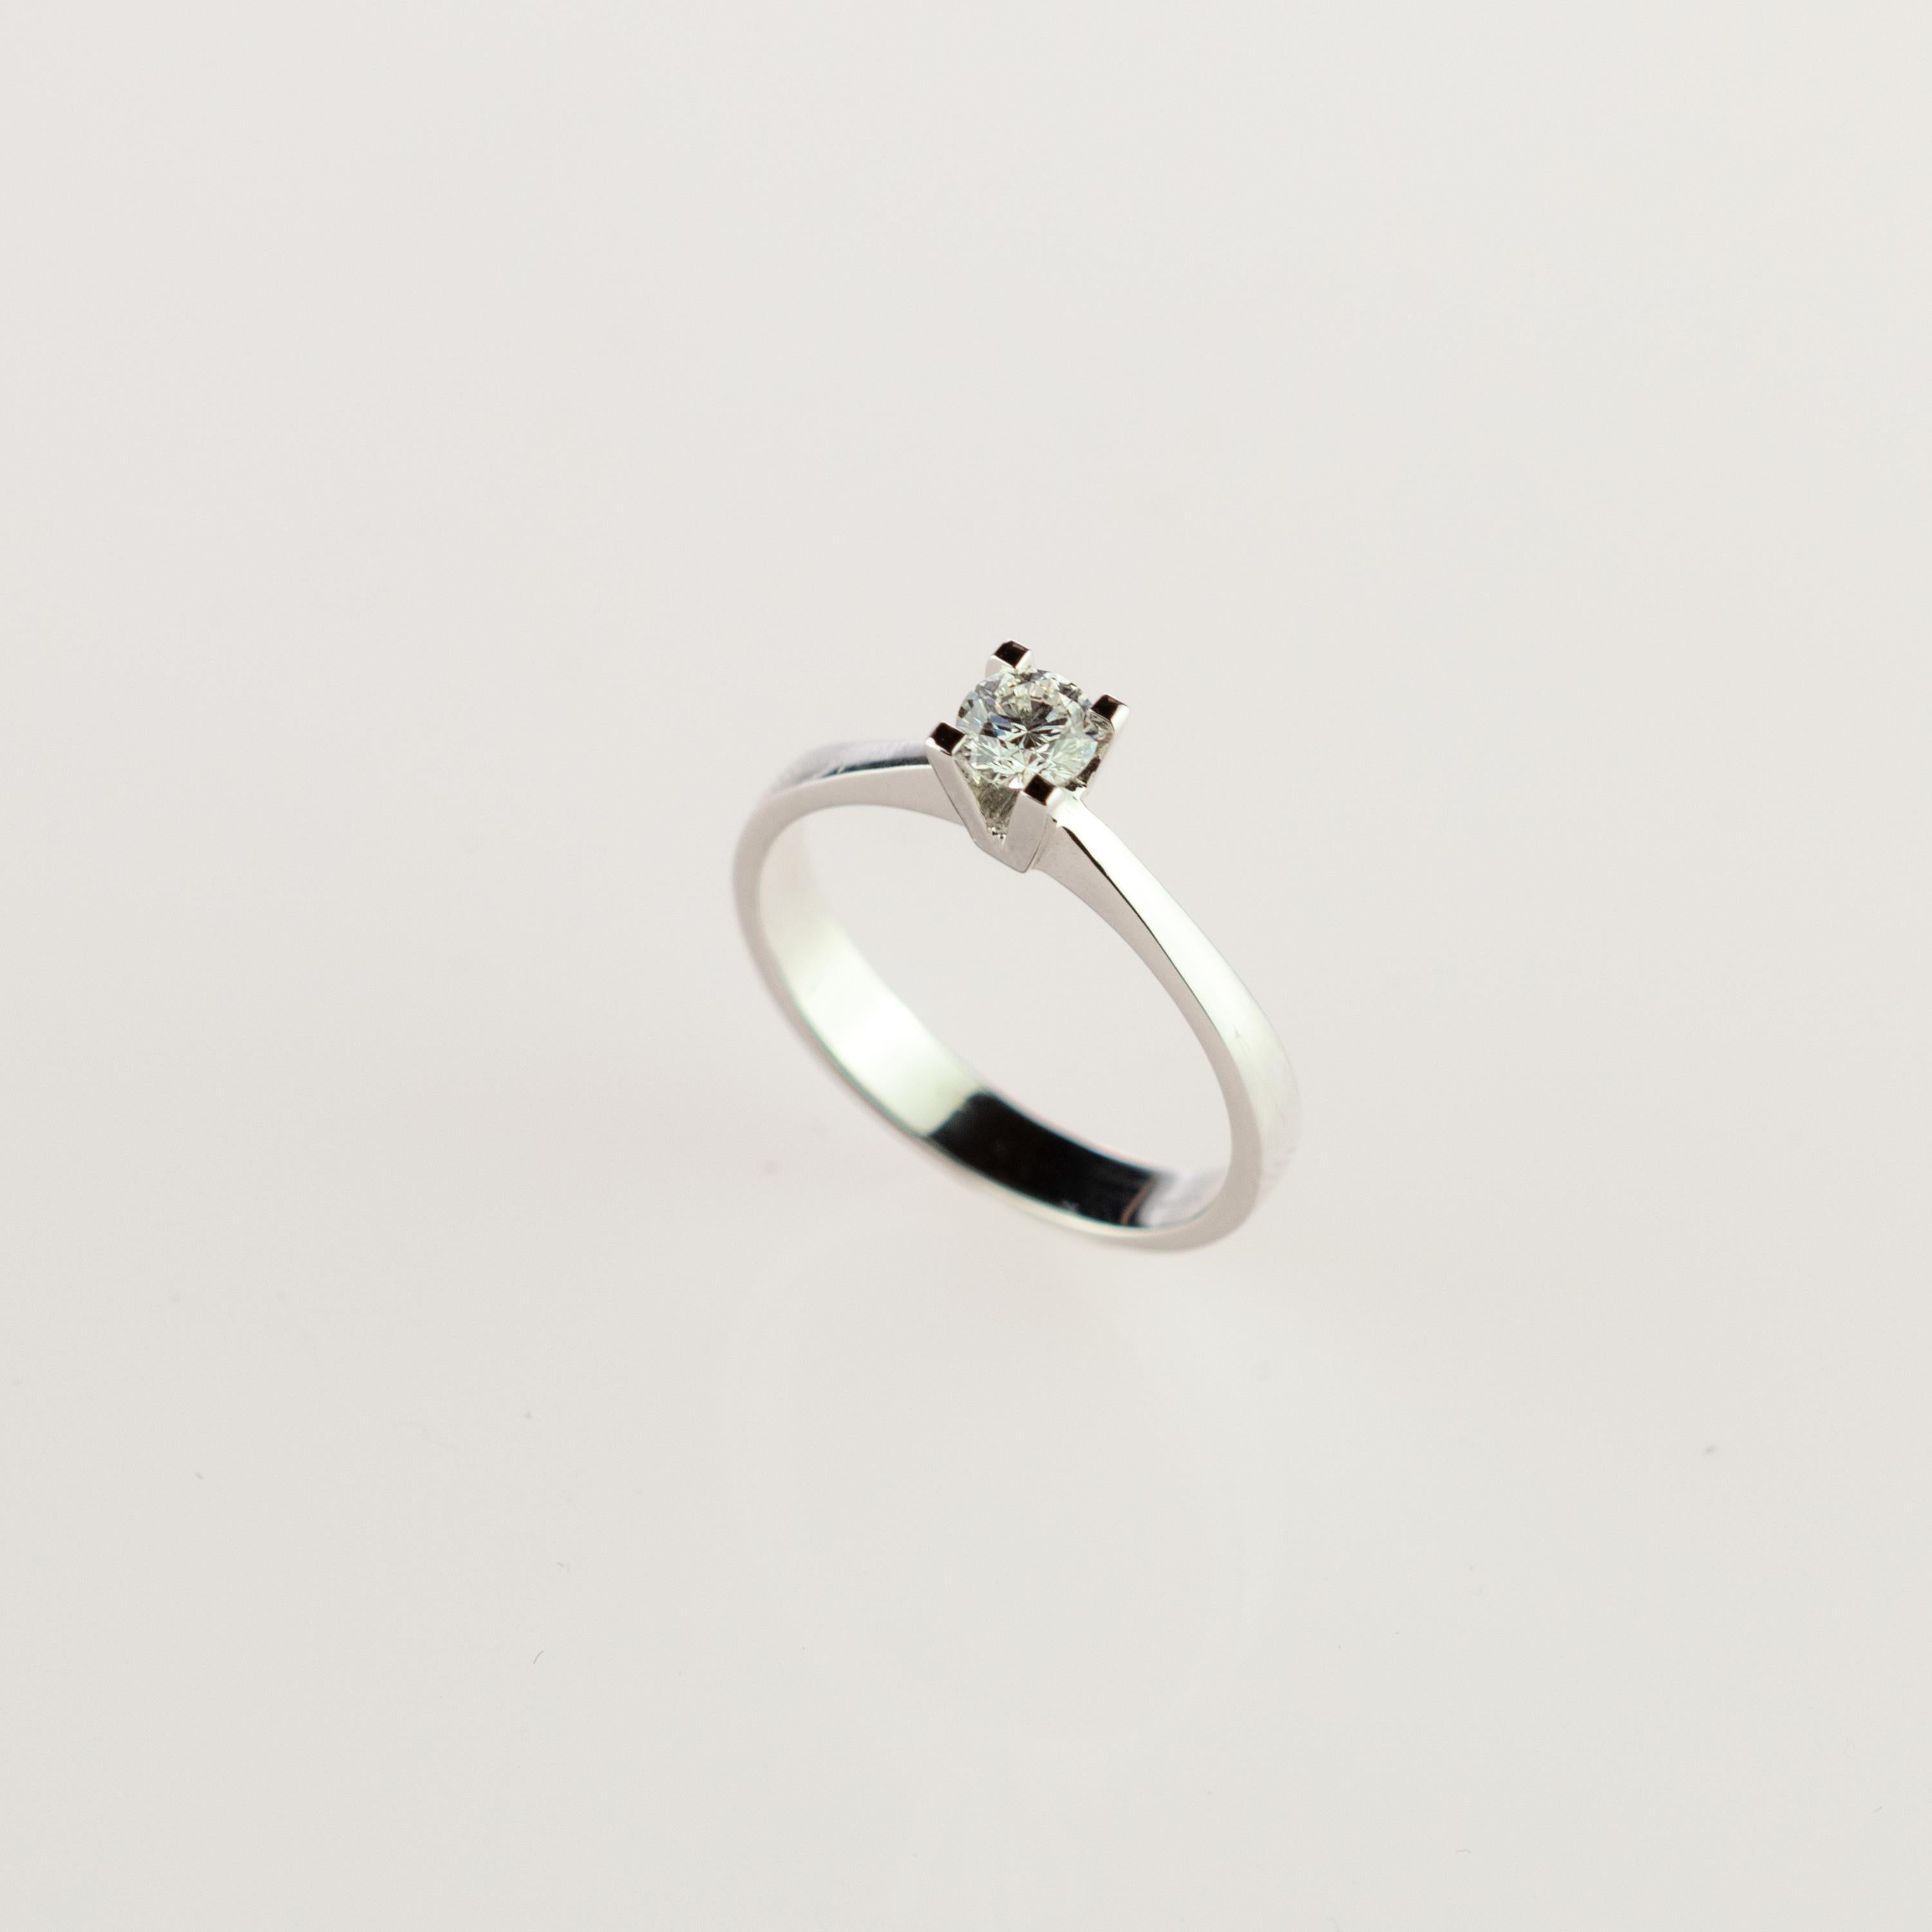 Solitaire diamond setted in a 18 karat white gold square shape. With 0.33 carat the round jewel is the perfect and stylish accessory to represent a magnificent love. AIG Certified (The Color, The Clarity, The Cut and The Carat weight).

This jewel